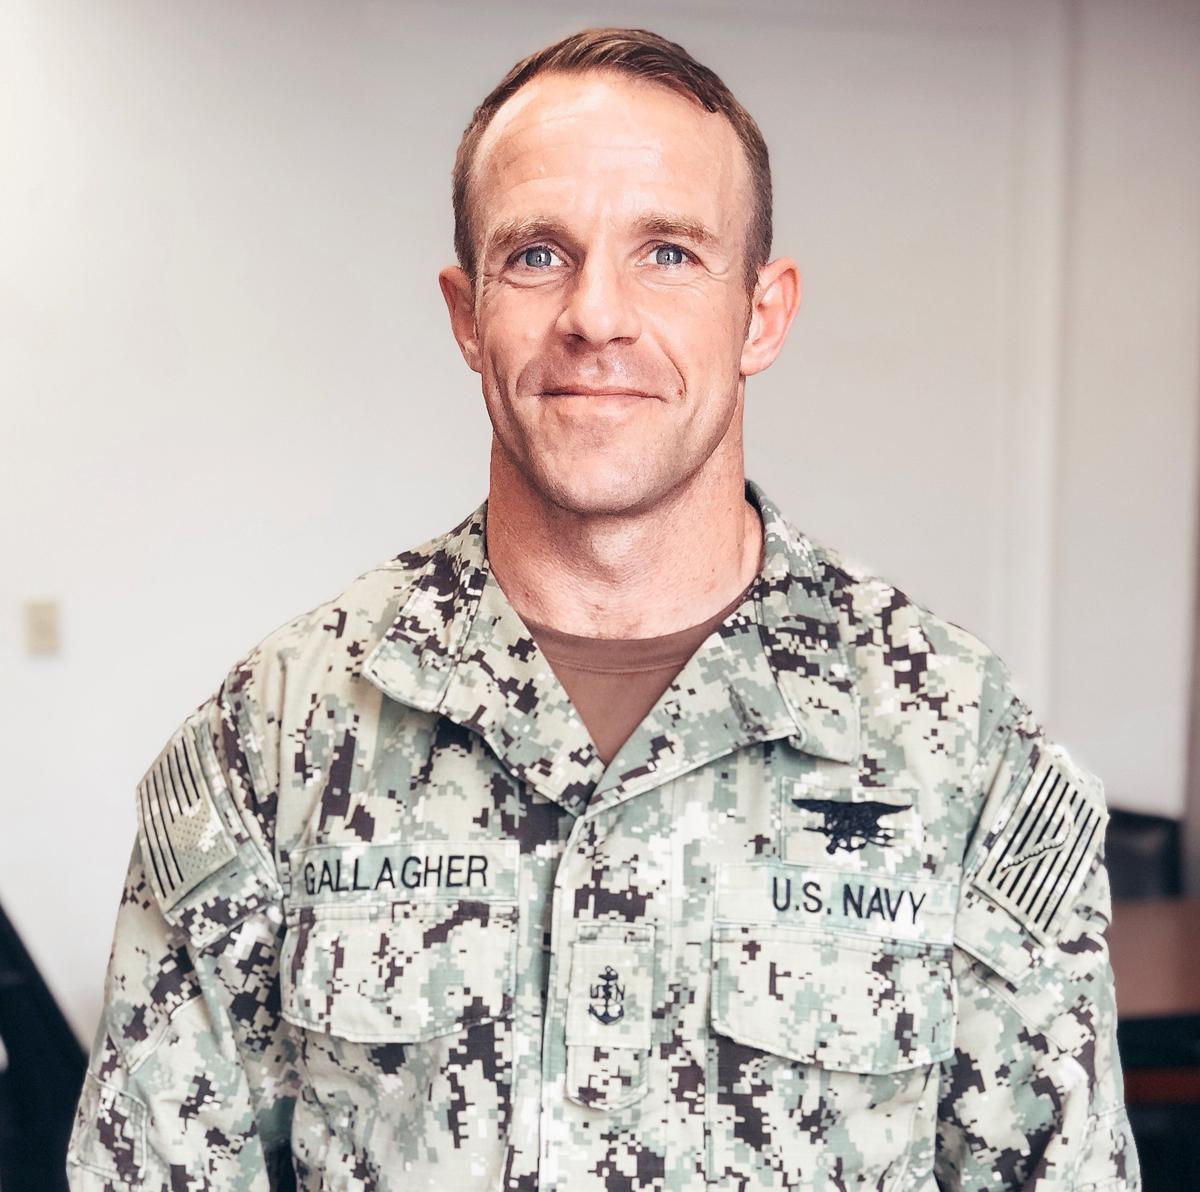 [NEWS] Judge finds Navy SEAL’s fair trial rights violated in war crimes case – Loganspace AI